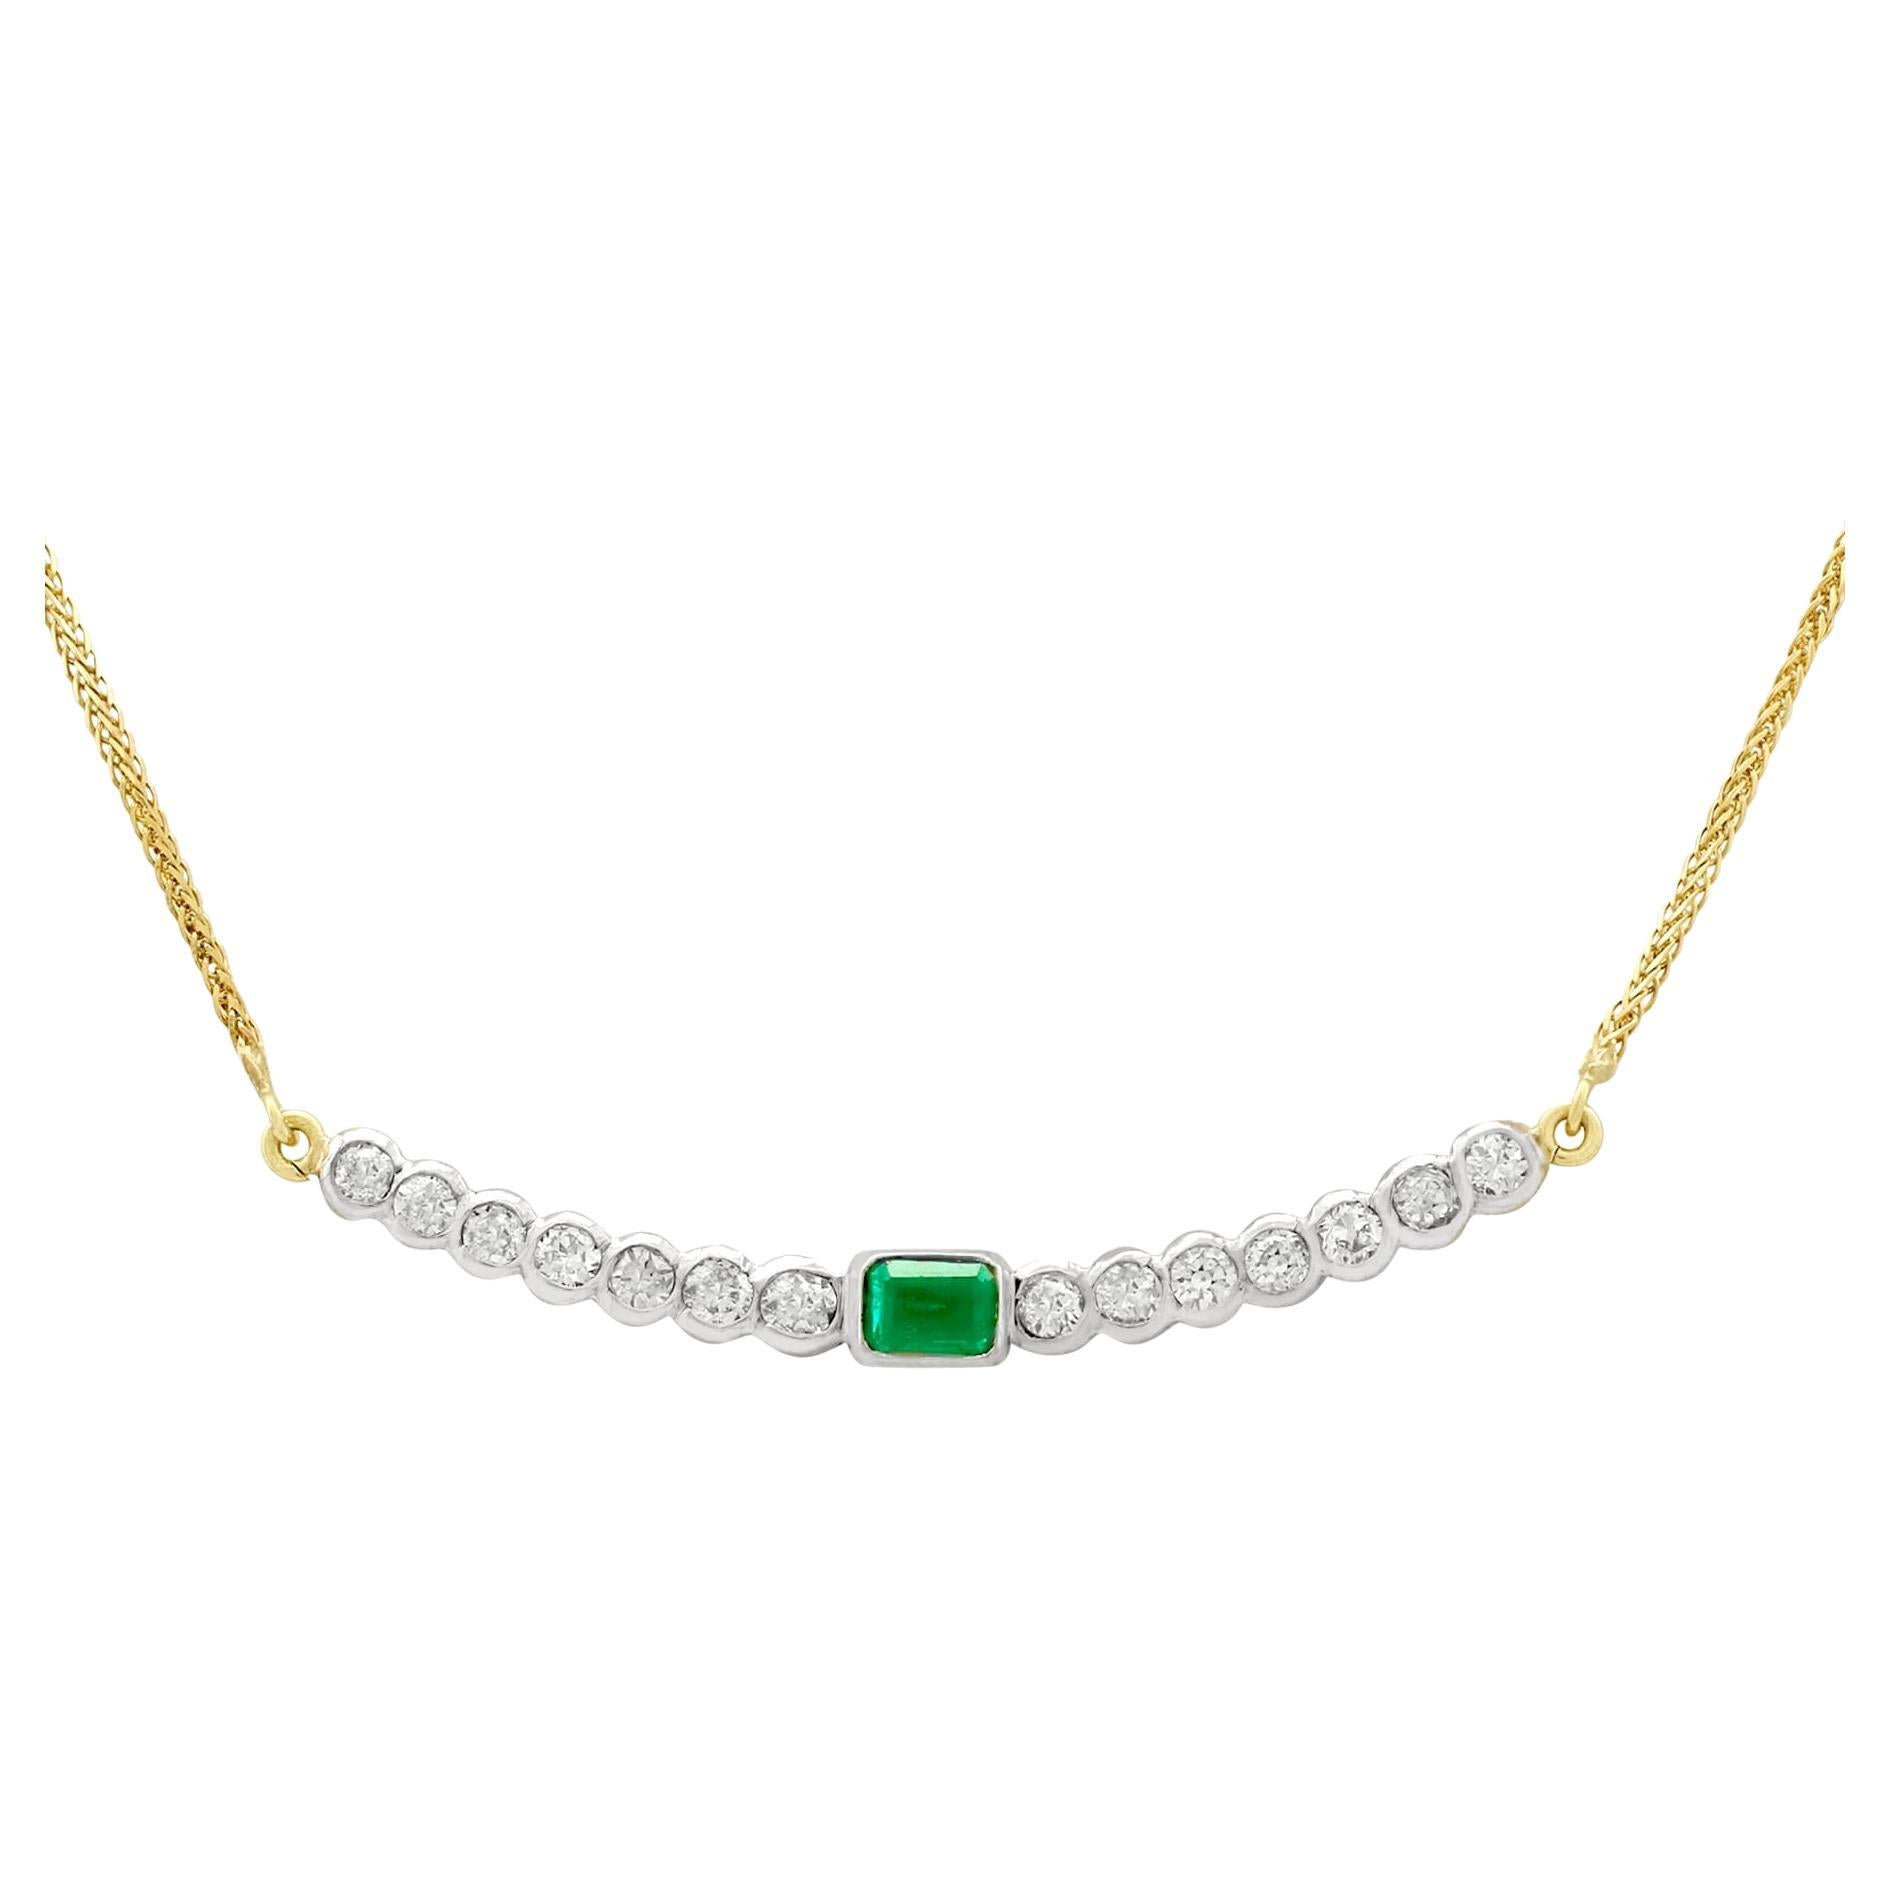 Vintage Emerald and 1.54 Carat Diamond White Gold Necklace